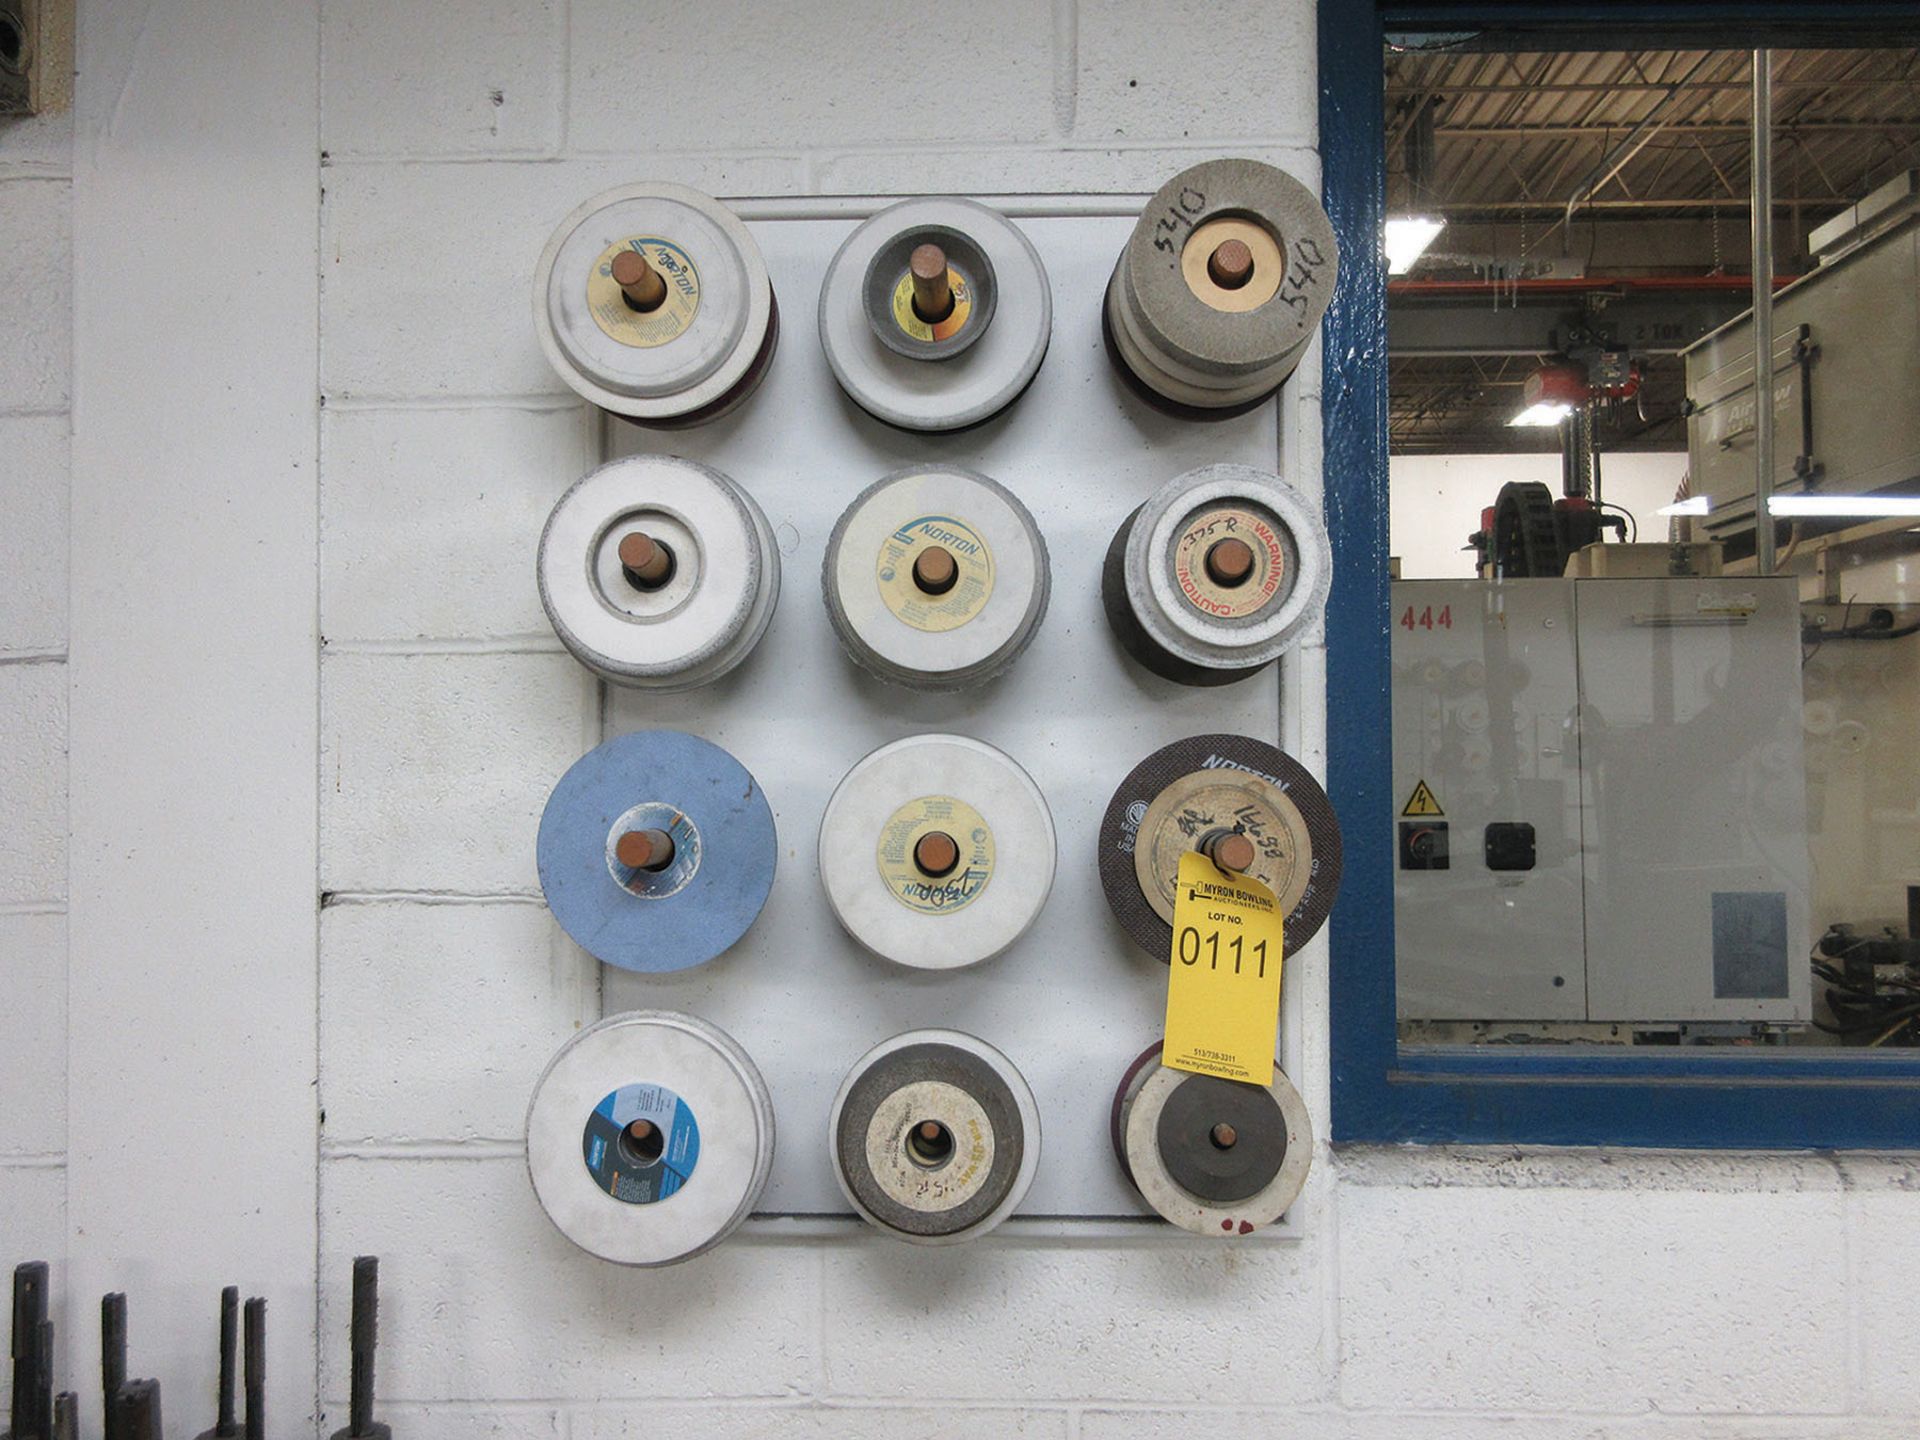 ALL GRINDING WHEELS LOCATED ON WALLS (GRINDING ROOM)